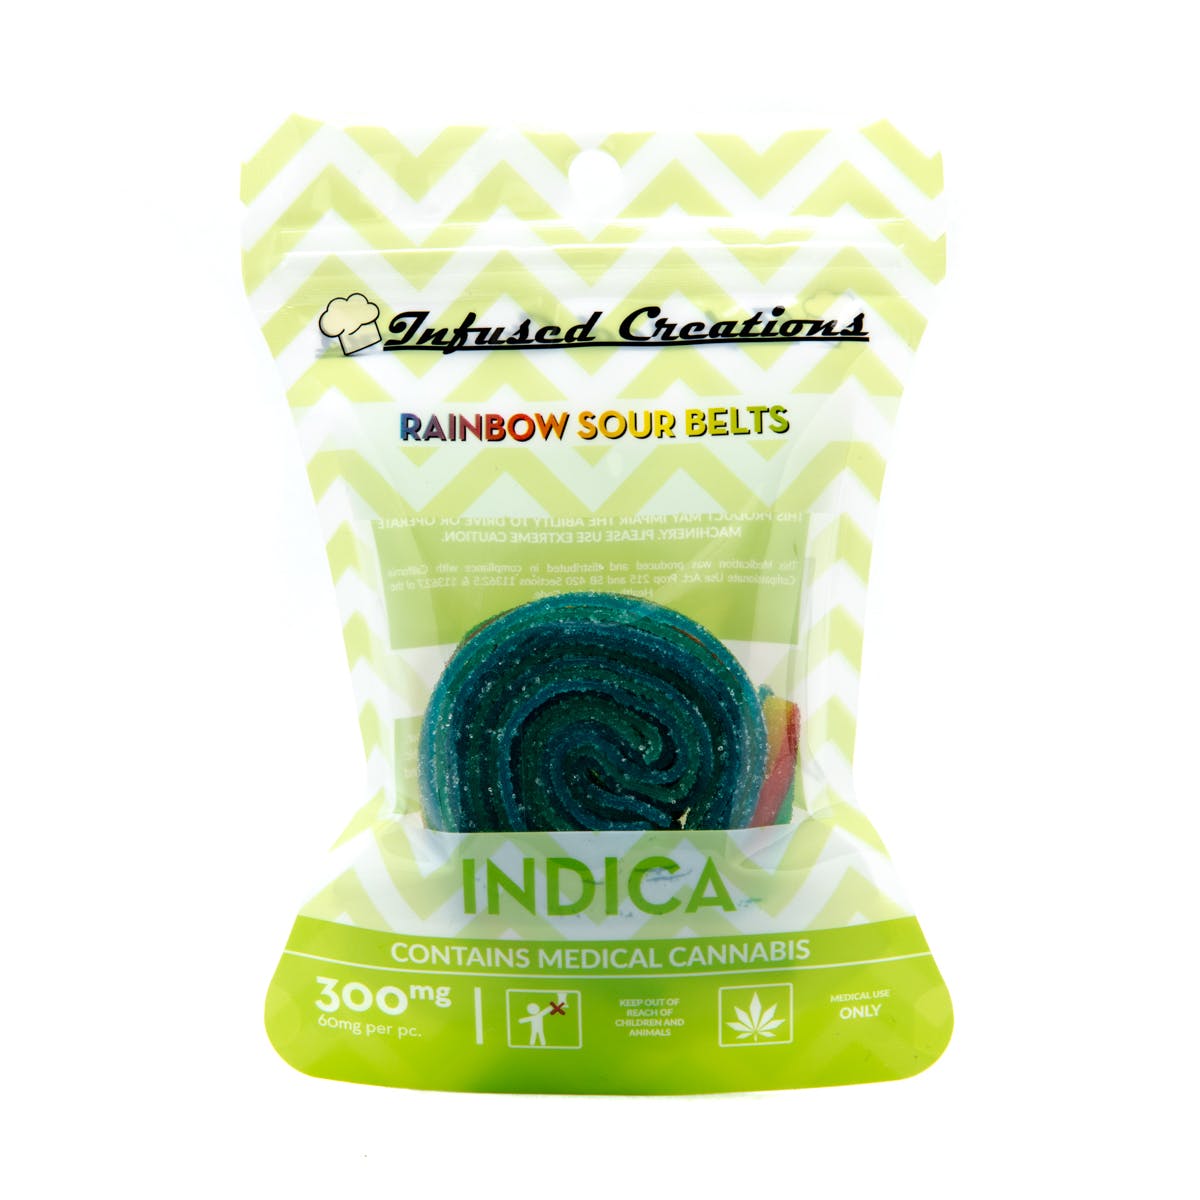 Rainbow Sour Belts Indica, 300mg